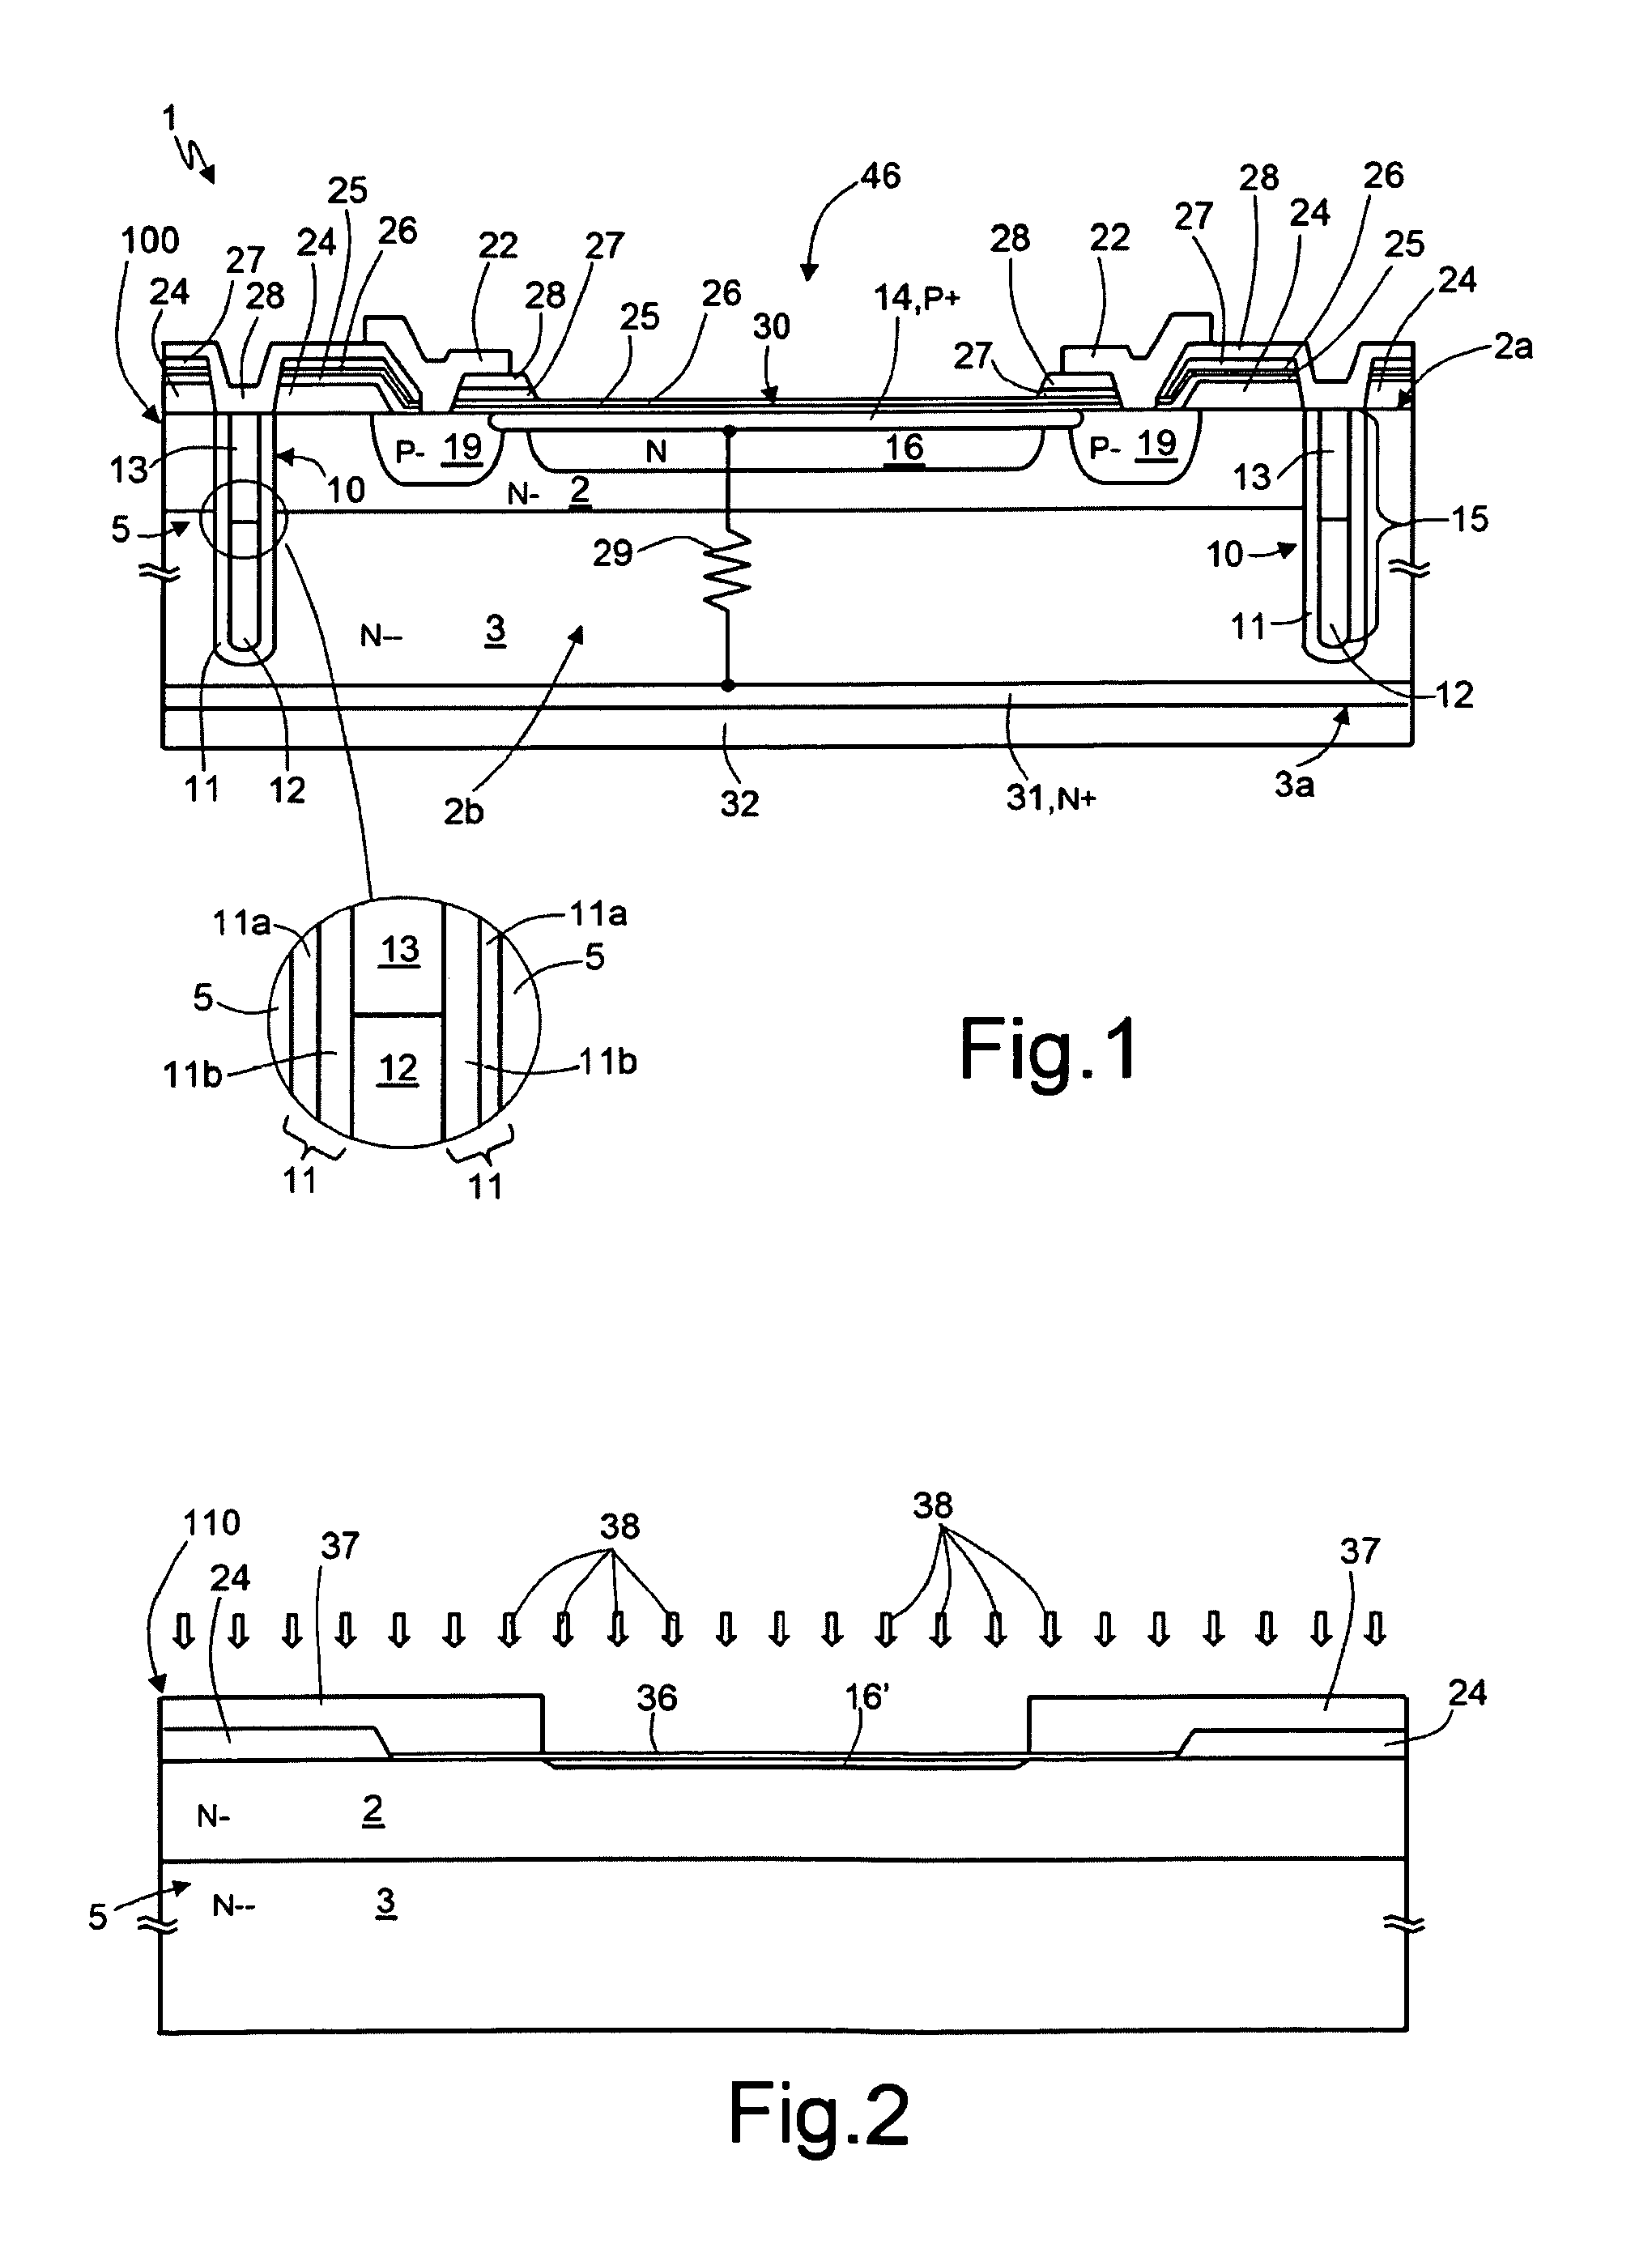 Array of mutually isolated, geiger-mode, avalanche photodiodes and manufacturing method thereof